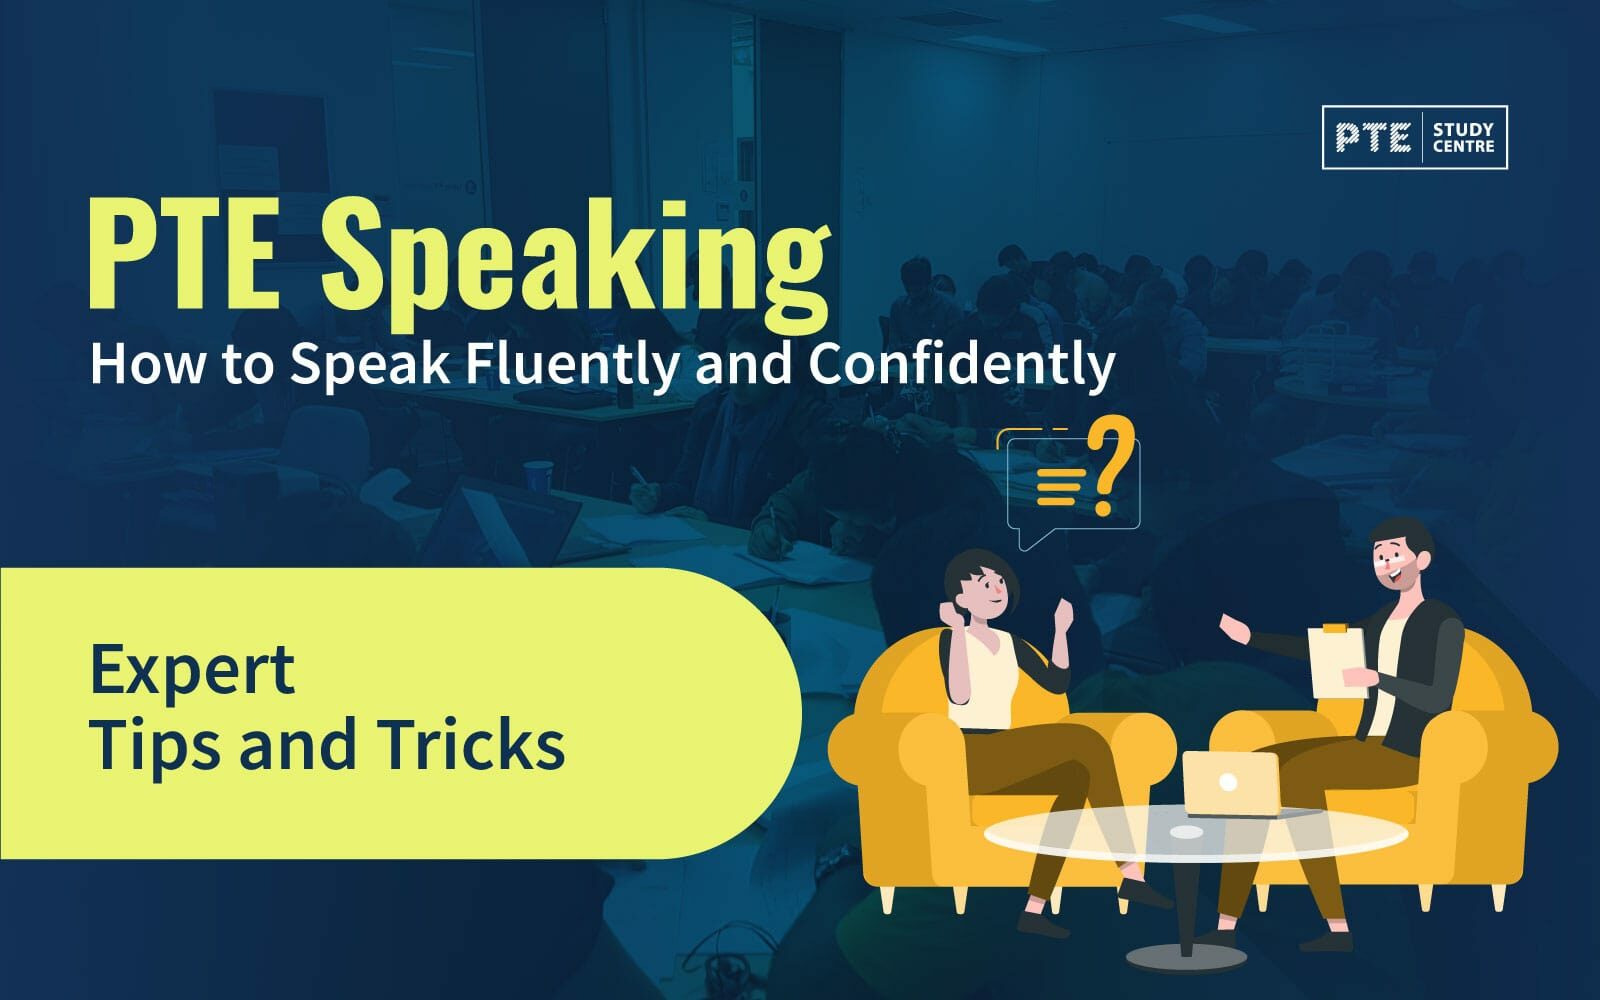 PTE Speaking: How to Speak Fluently and Confidently